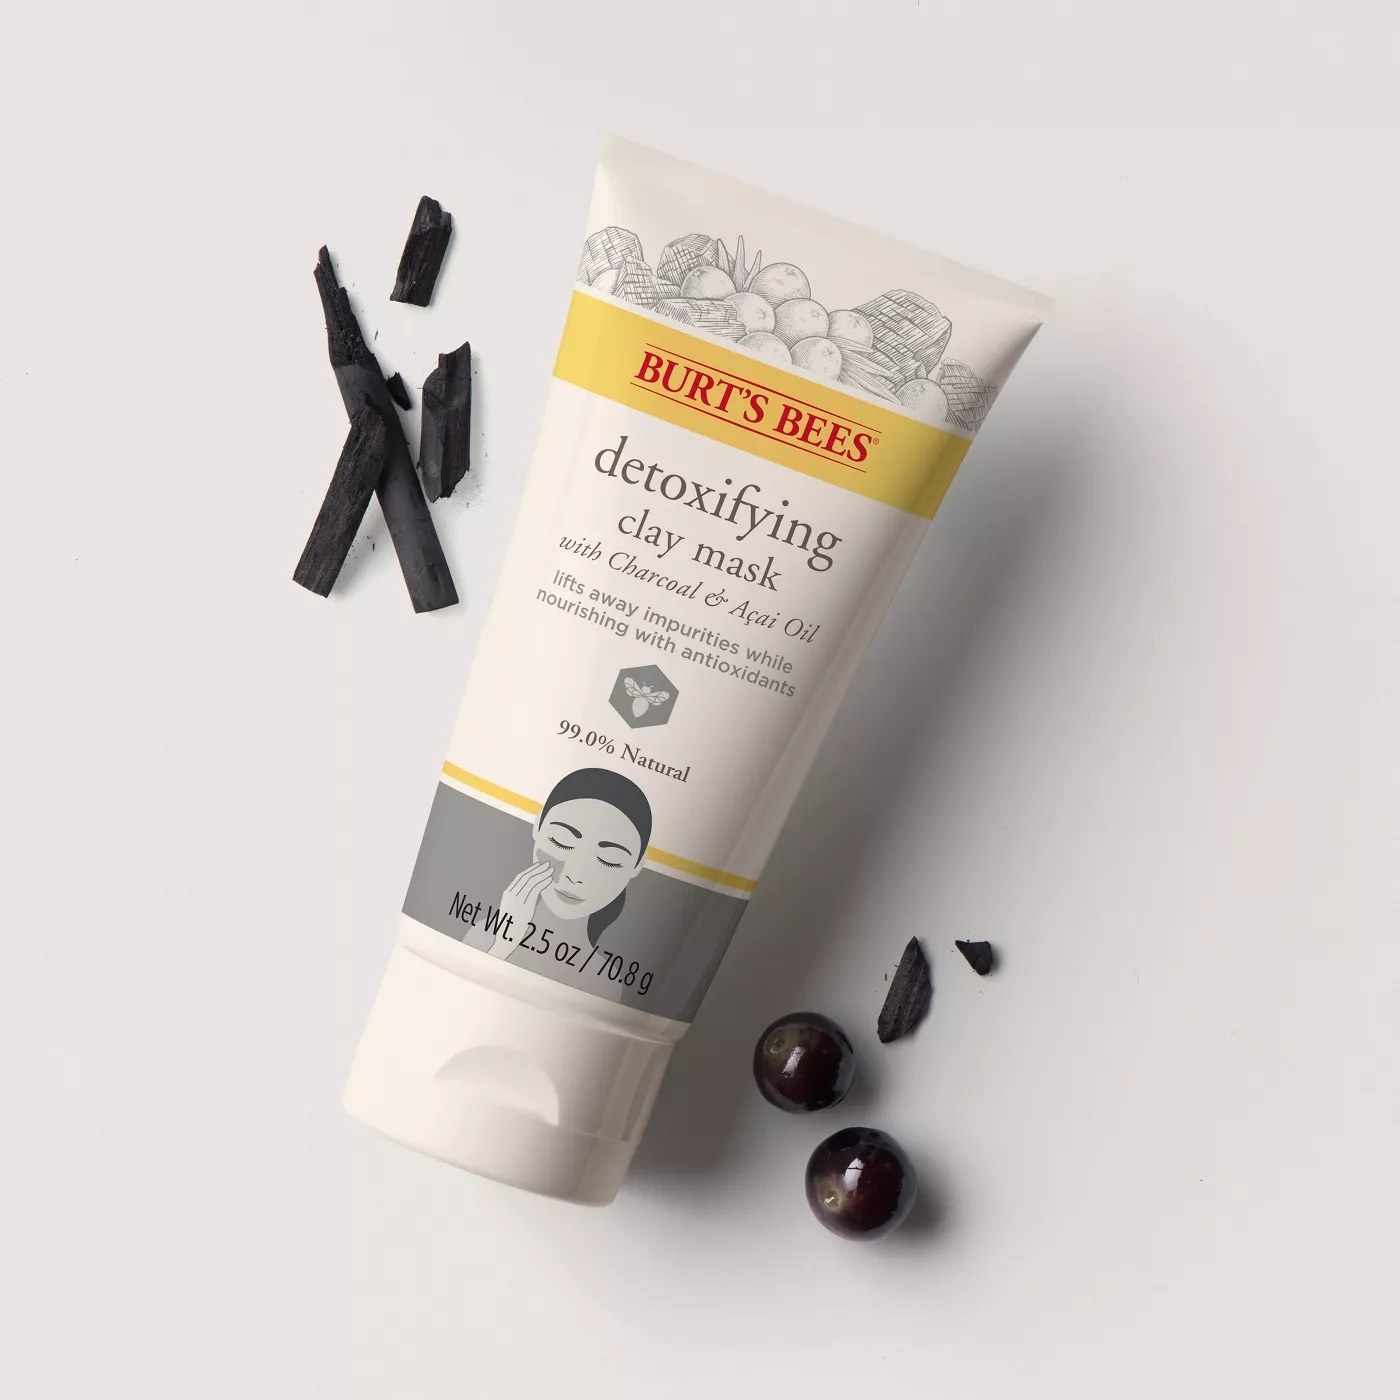 Burt&#x27;s Bees detoxifying clay mask with charcoal &amp;amp; acai oil that lifts away impurities while nourishing with antioxidants